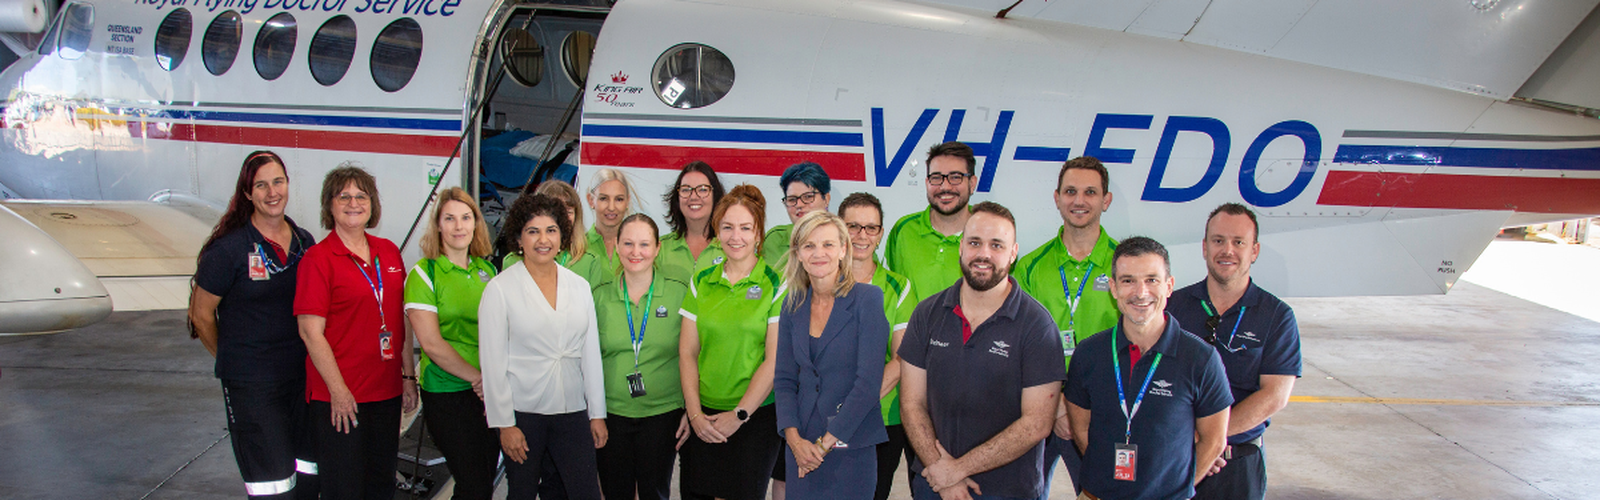 Ergon Energy Retail and RFDS staff in front of aircraft